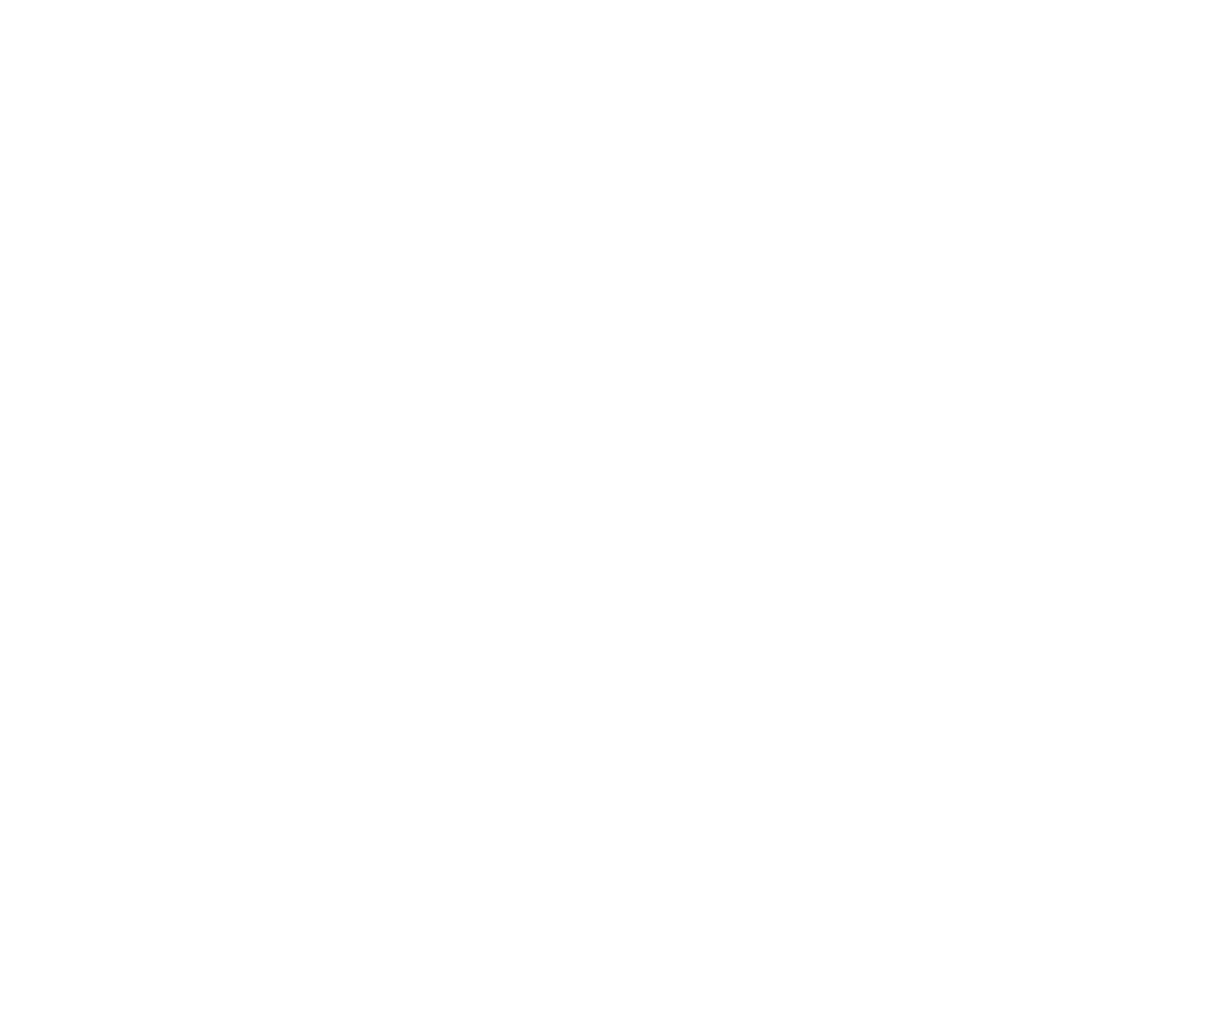 BC Patient Safety & Quality Council: Working Together. Accelerating Improvement.